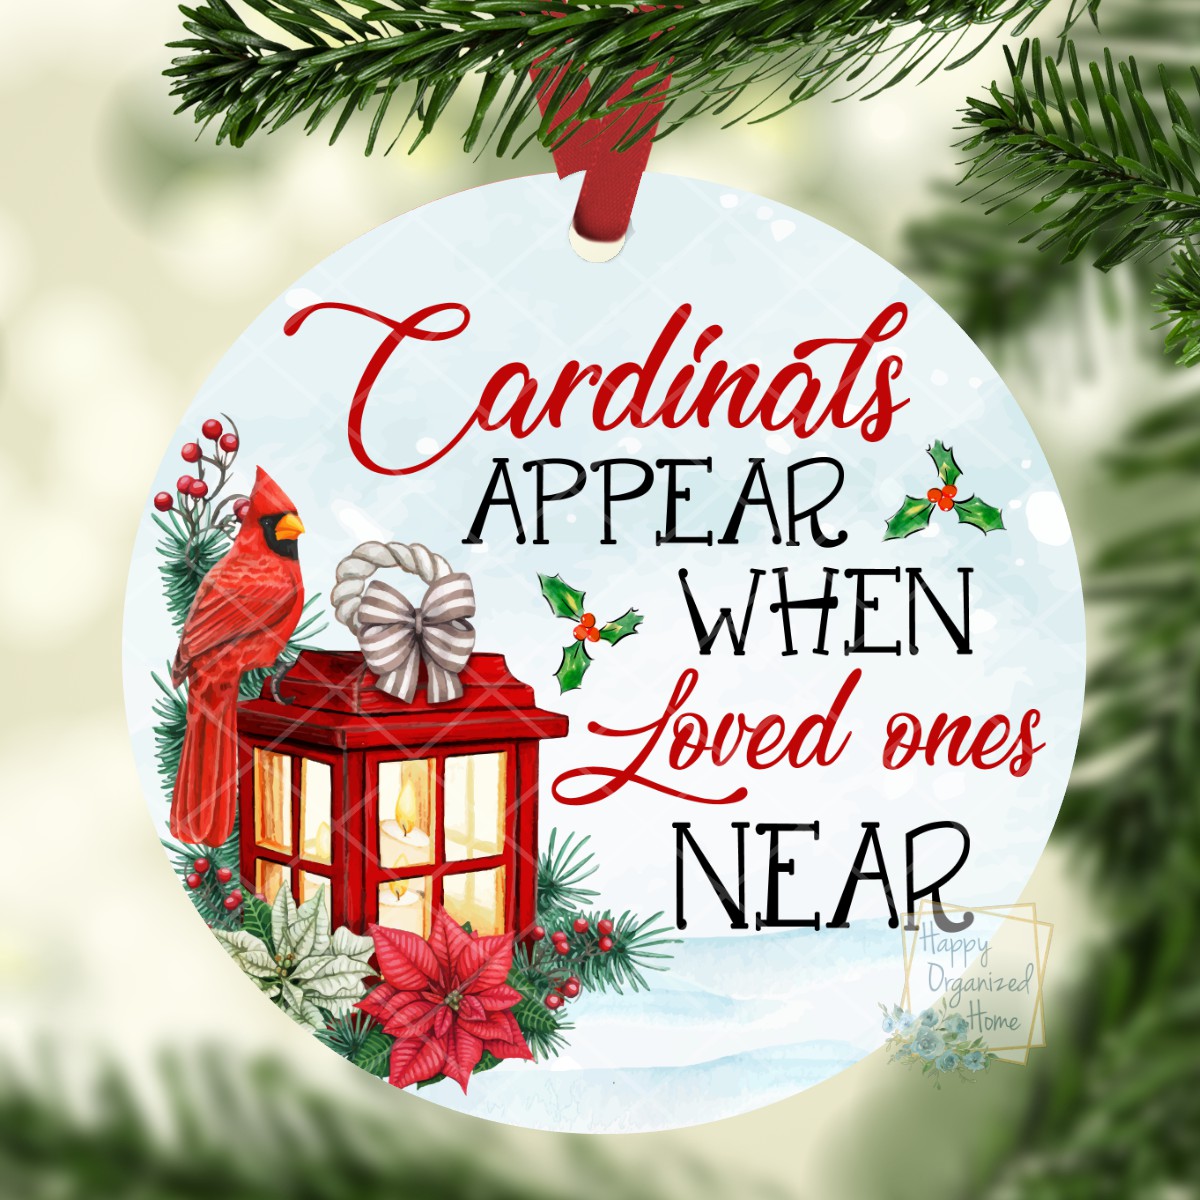 Cardinals Appear when Loved ones near - Christmas Ornament